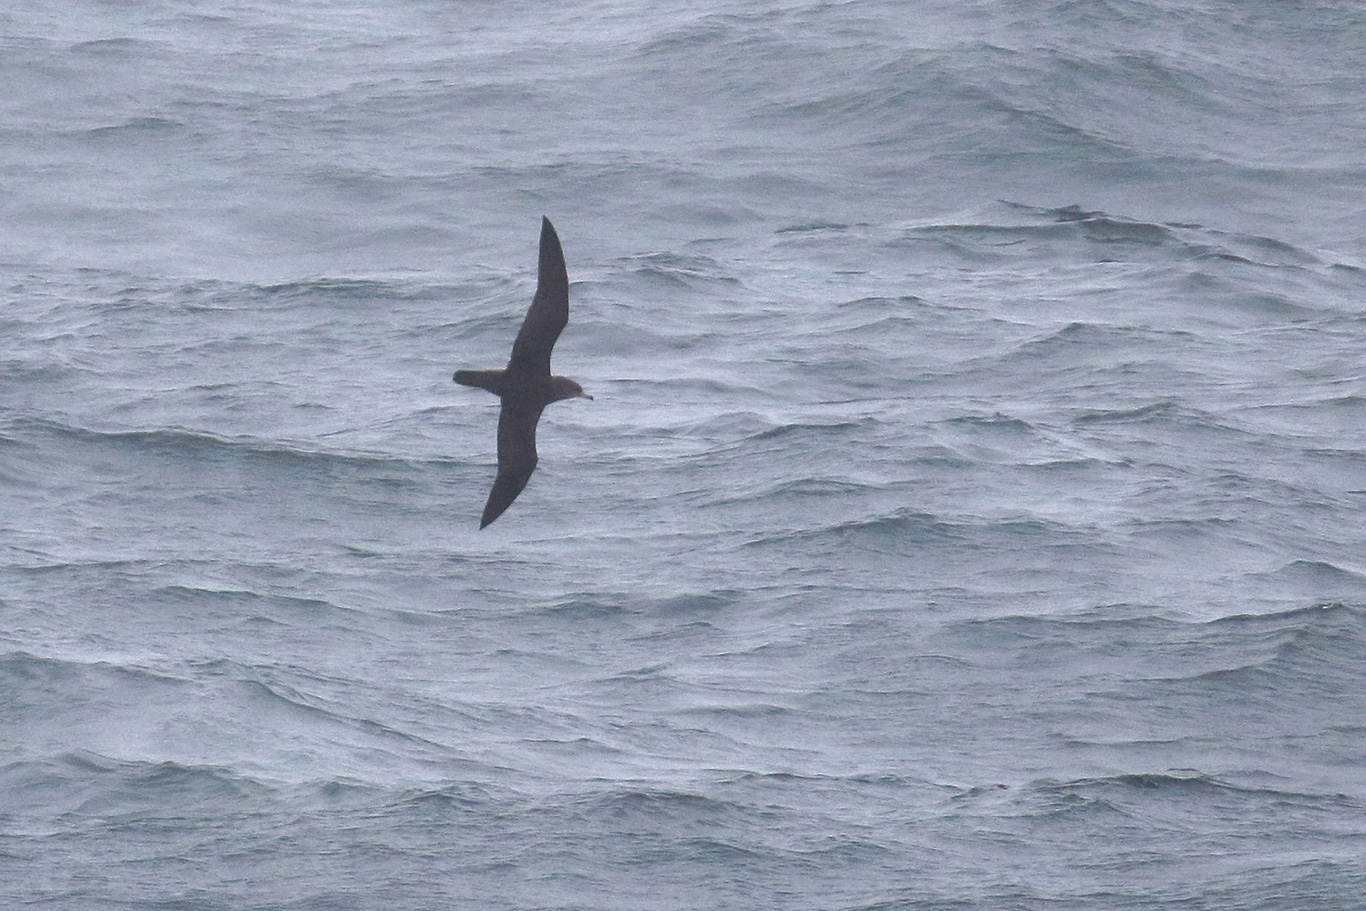 Pink-footed Shearwater, South-east Pacific Ocean, Chile.